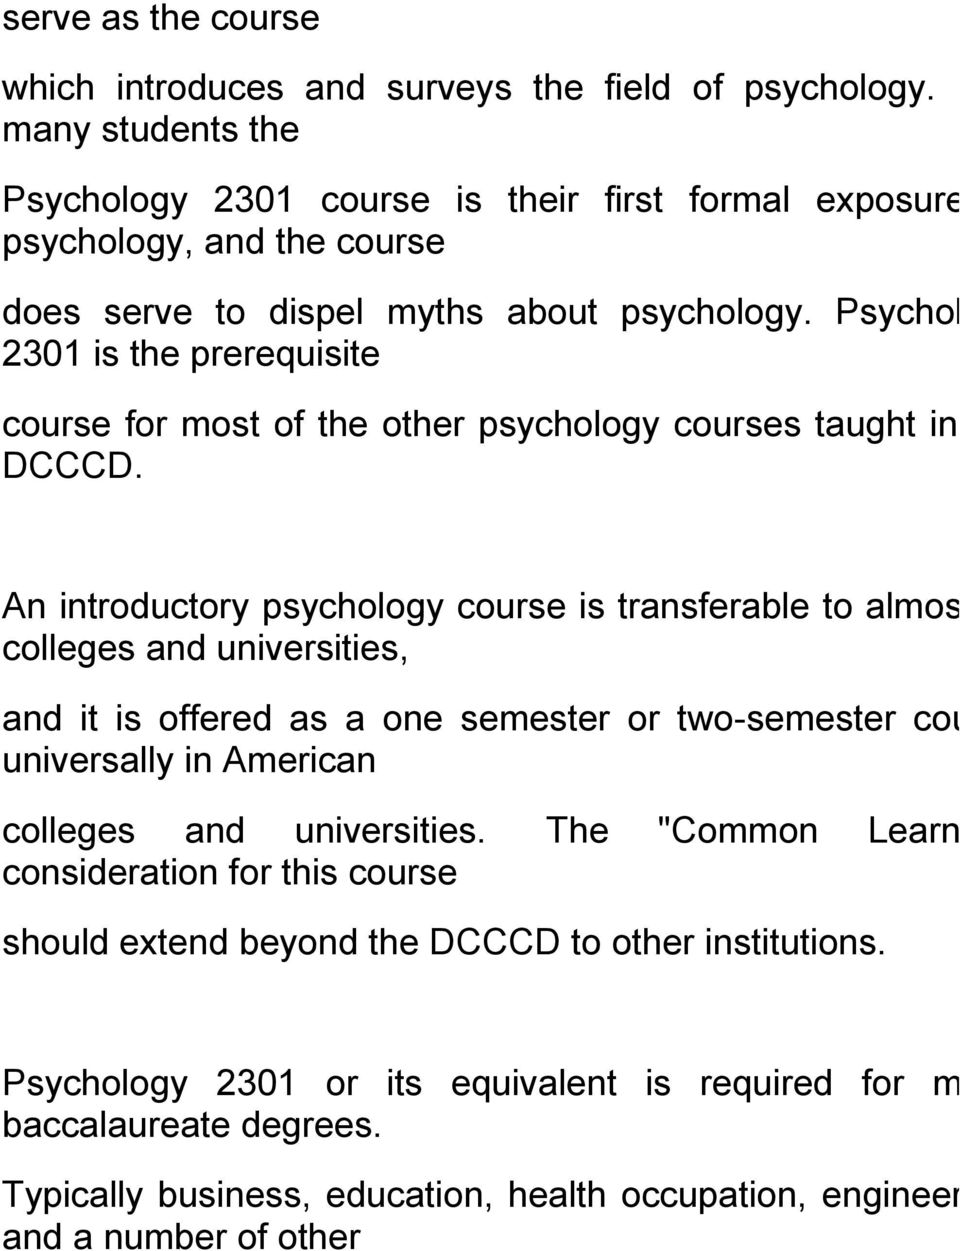 Psychology 2301 is the prerequisite course for most of the other psychology courses taught in the DCCCD.